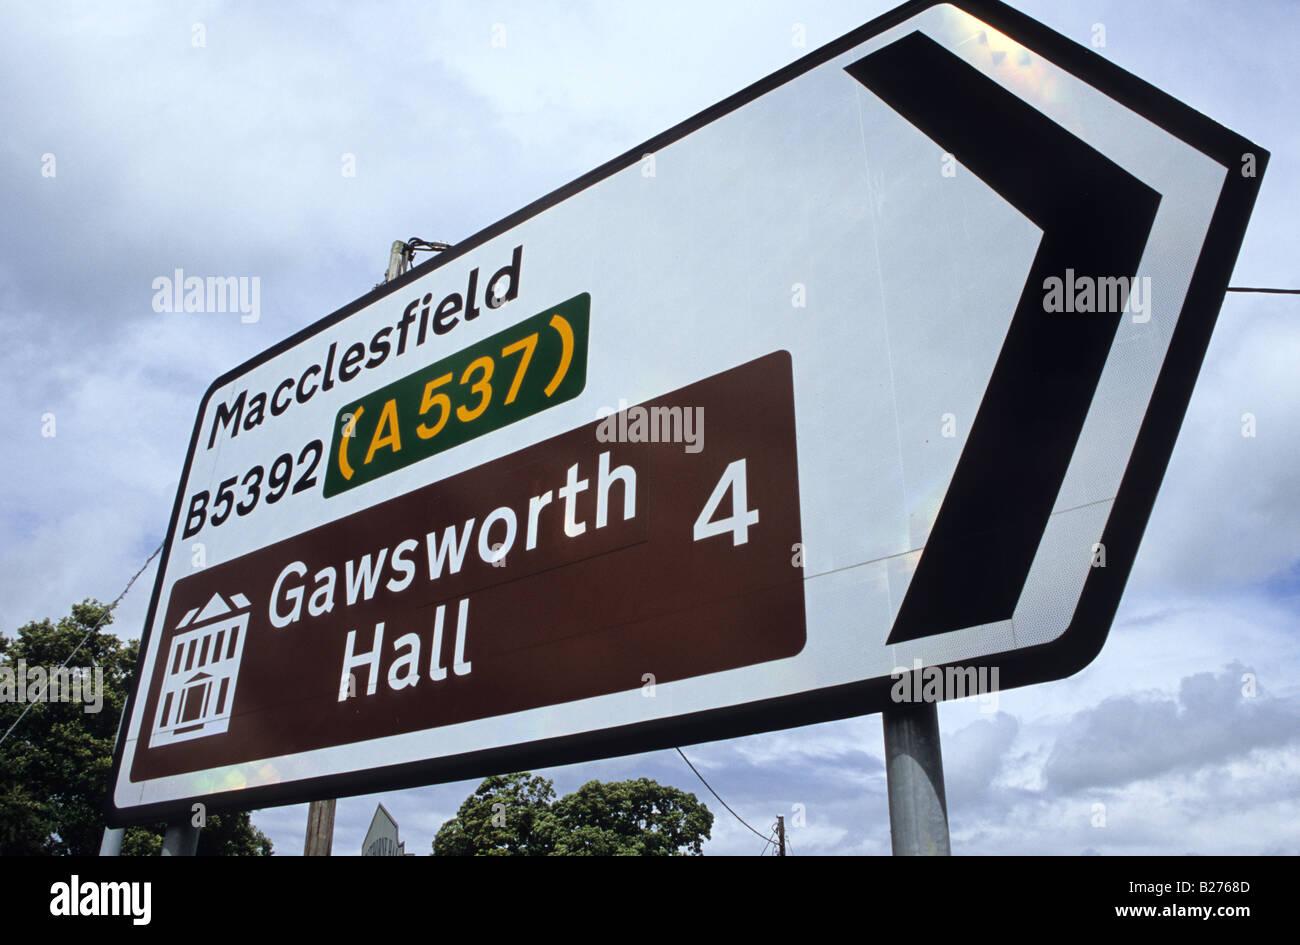 A537 Macclesfield And Gawsworth Hall Sign Stock Photo